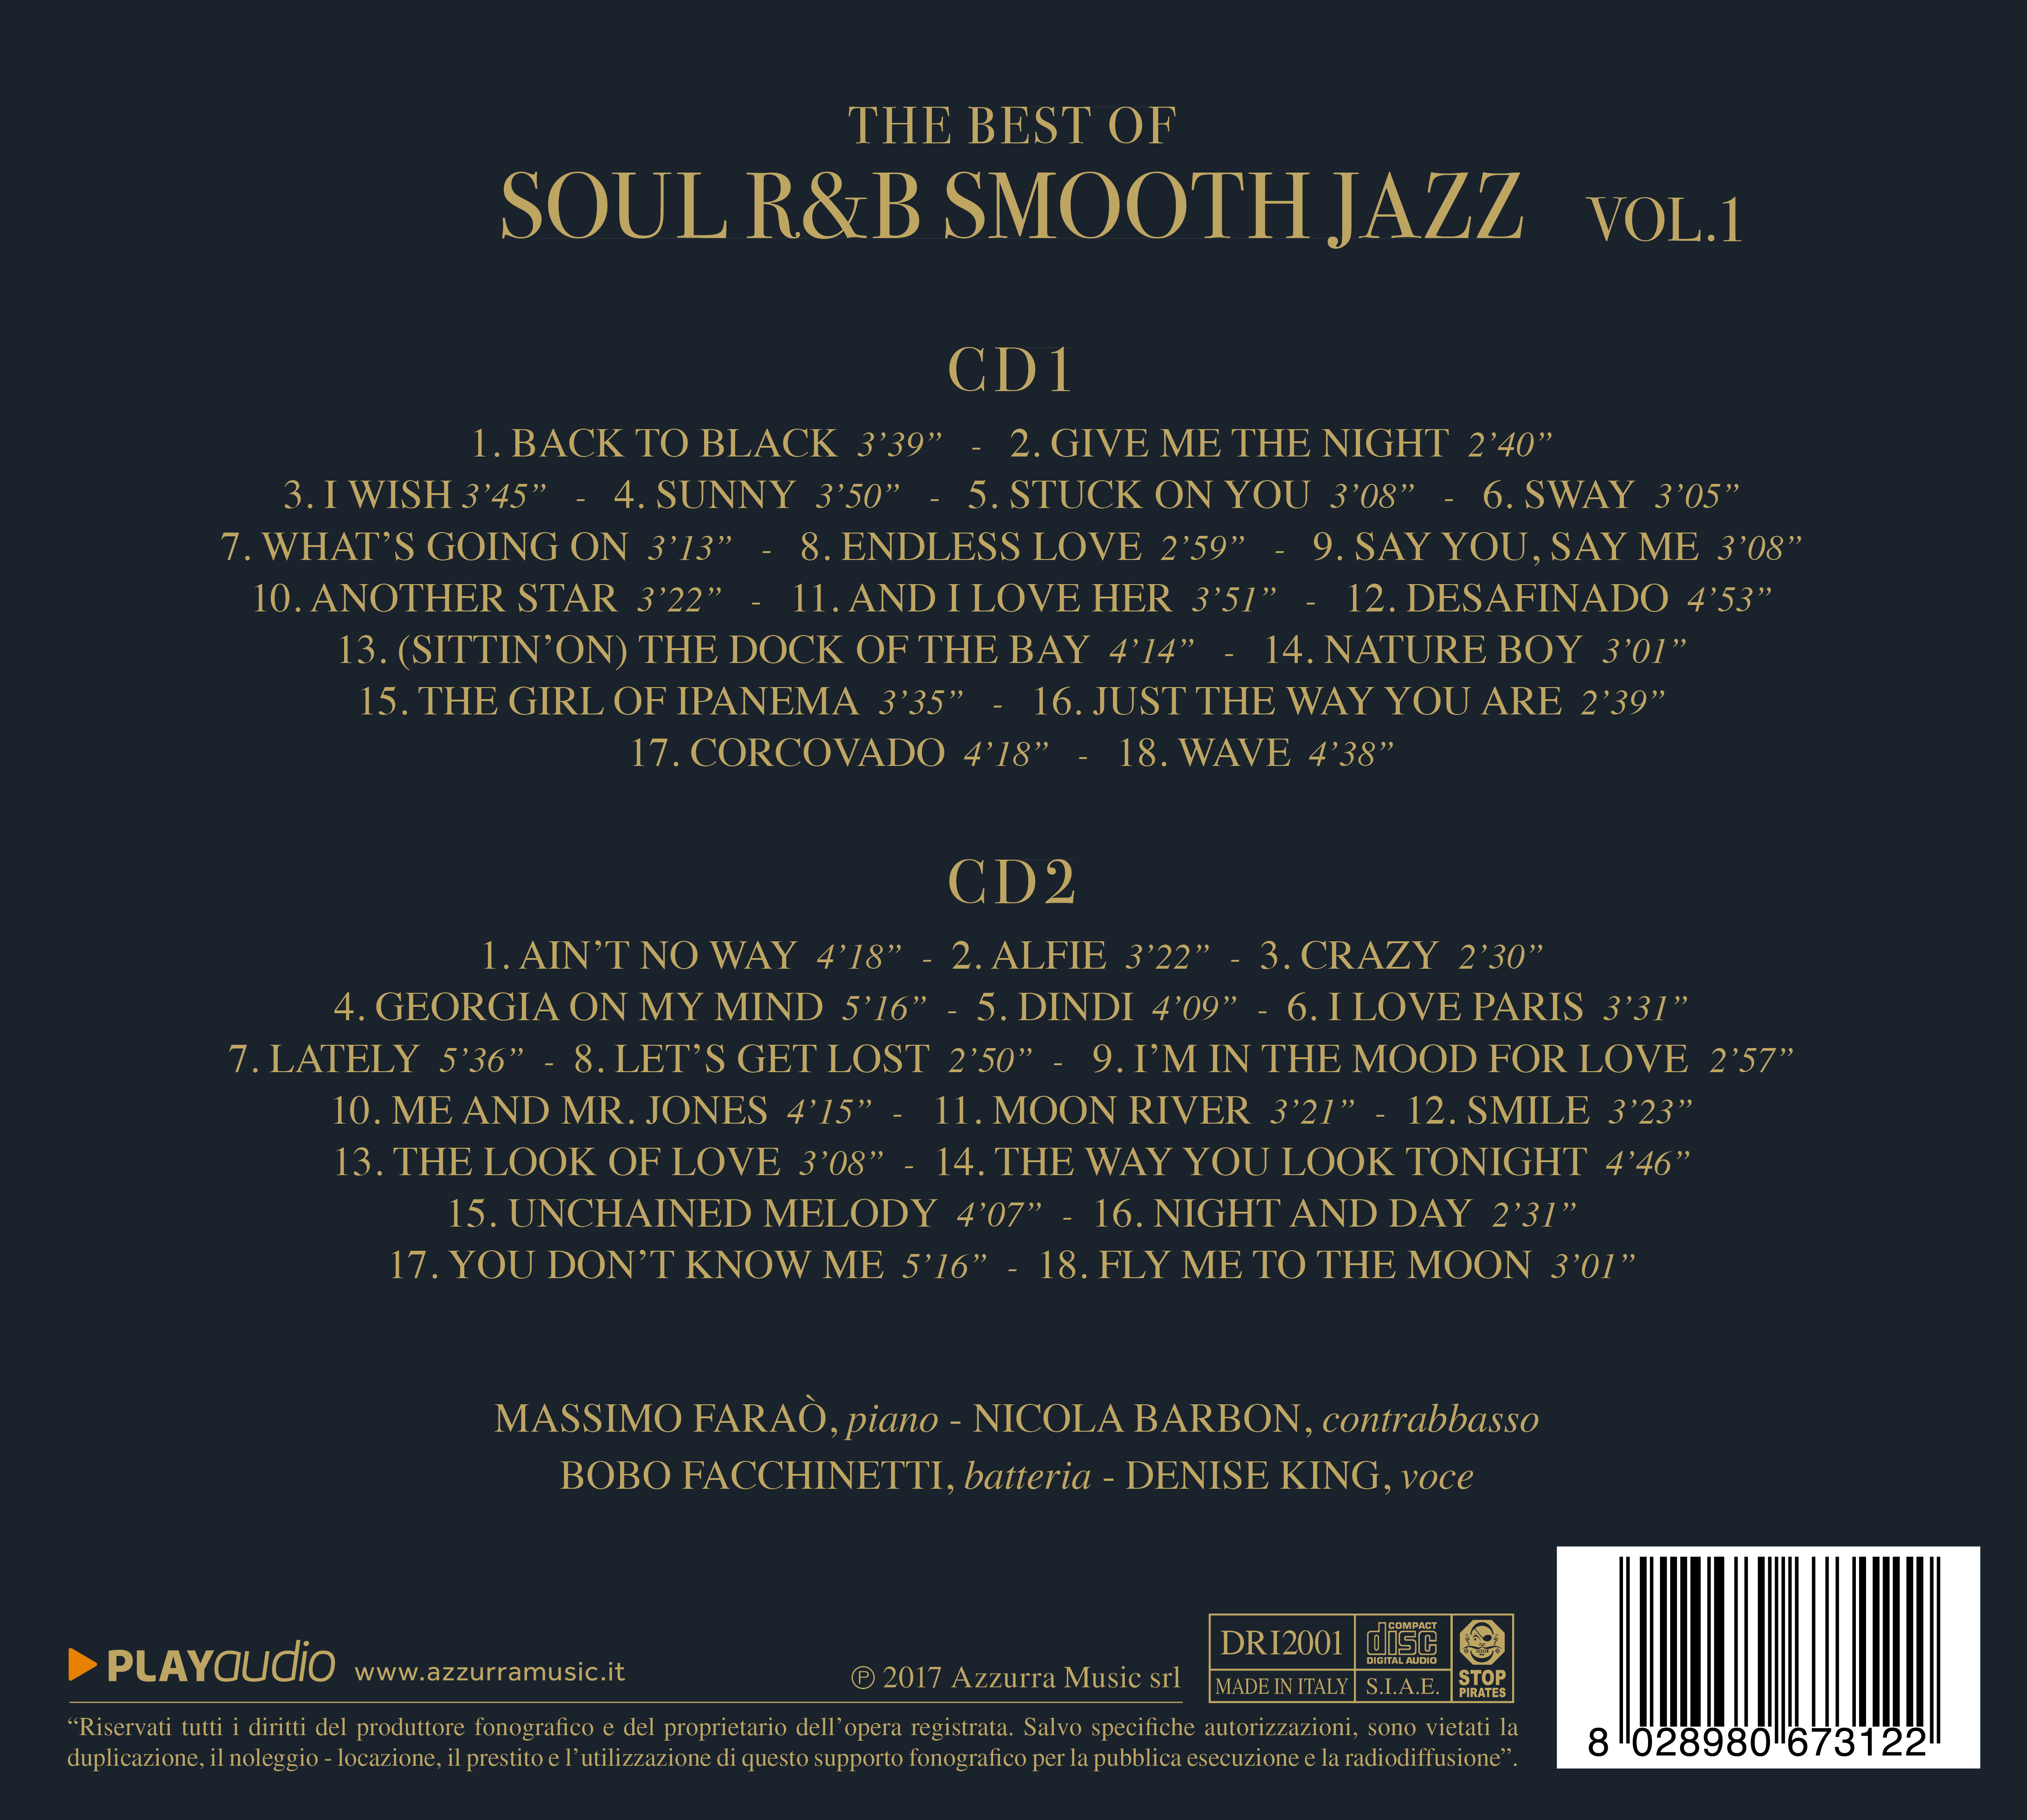 THE BEST OF SOUL R&B SMOOTH JAZZ 1